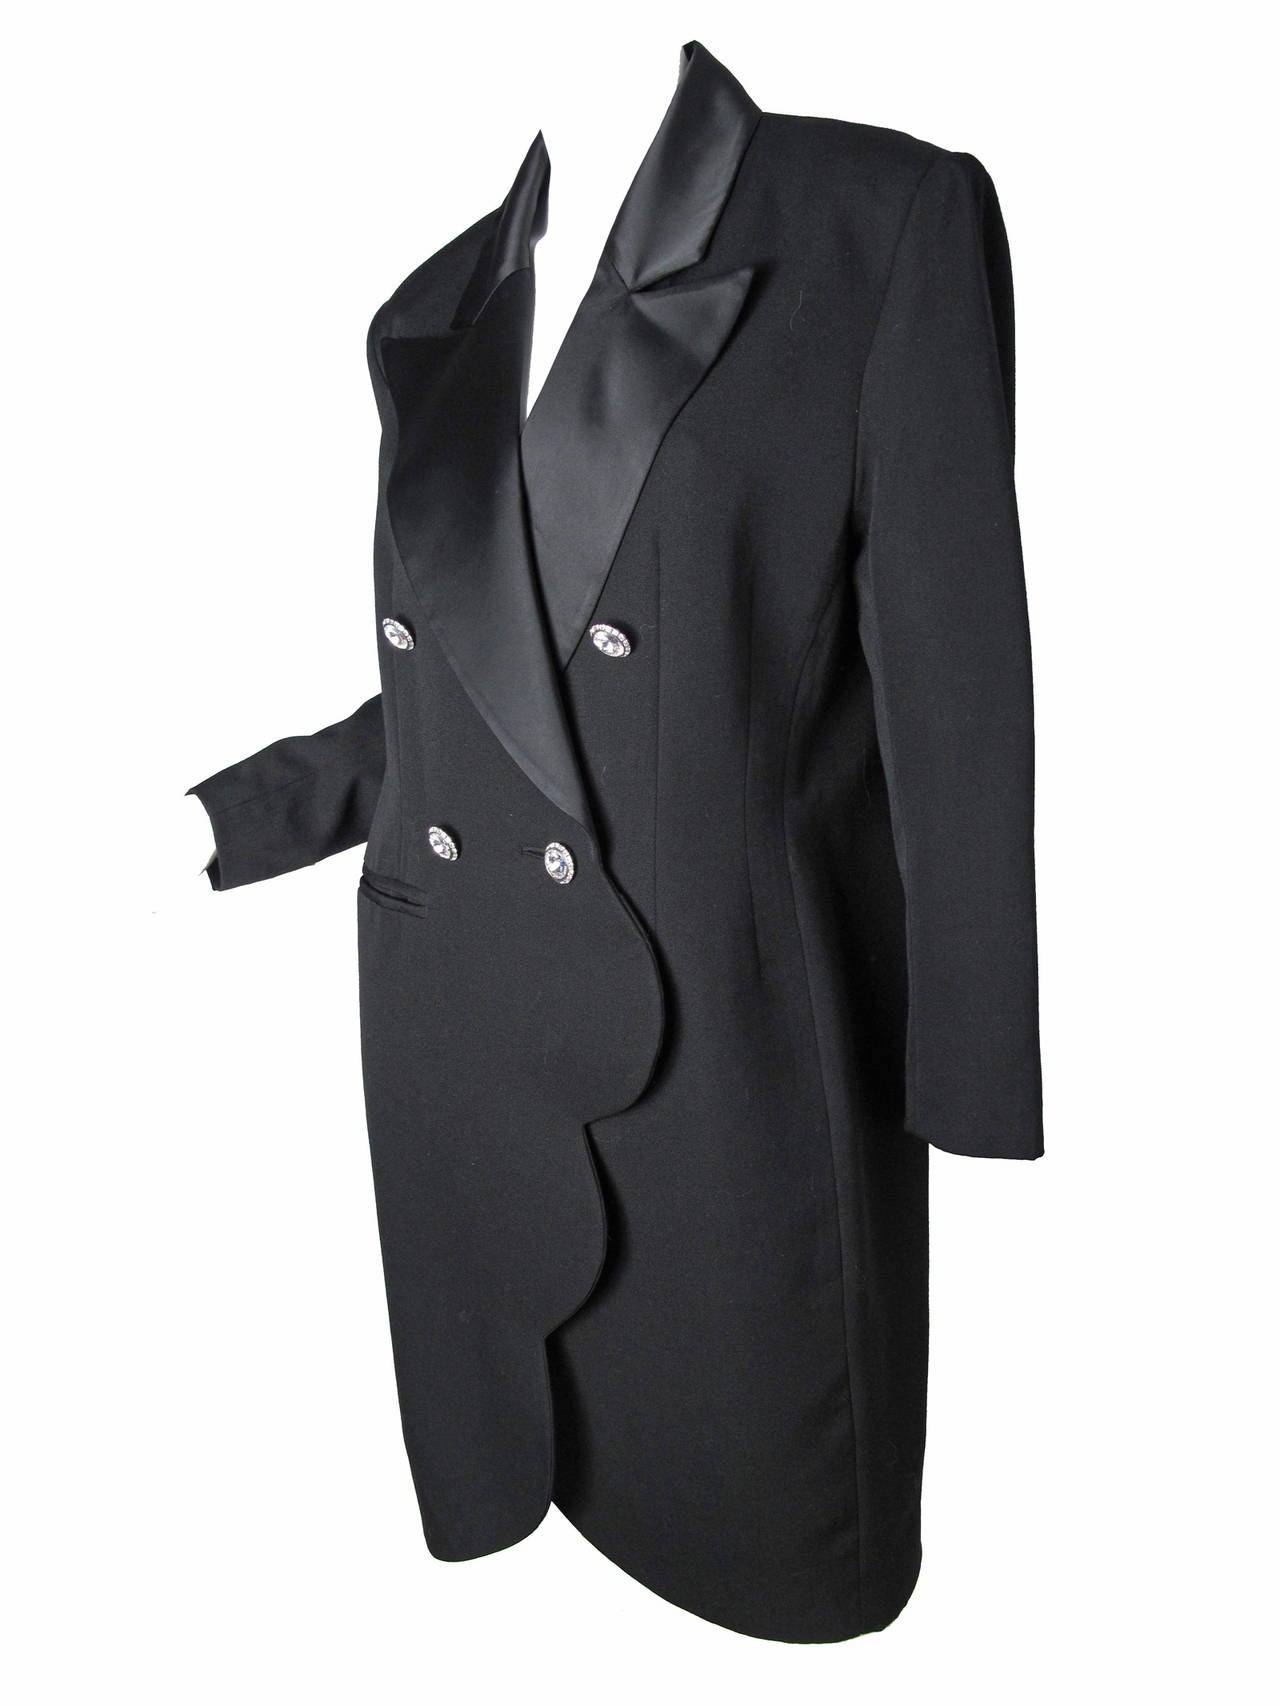 1980s / early 90s Guy Laroche black wool tuxedo dress / jacket with rhinestone buttons on front and cuffs. Scalloped edge, One front pocket , uncut.  38